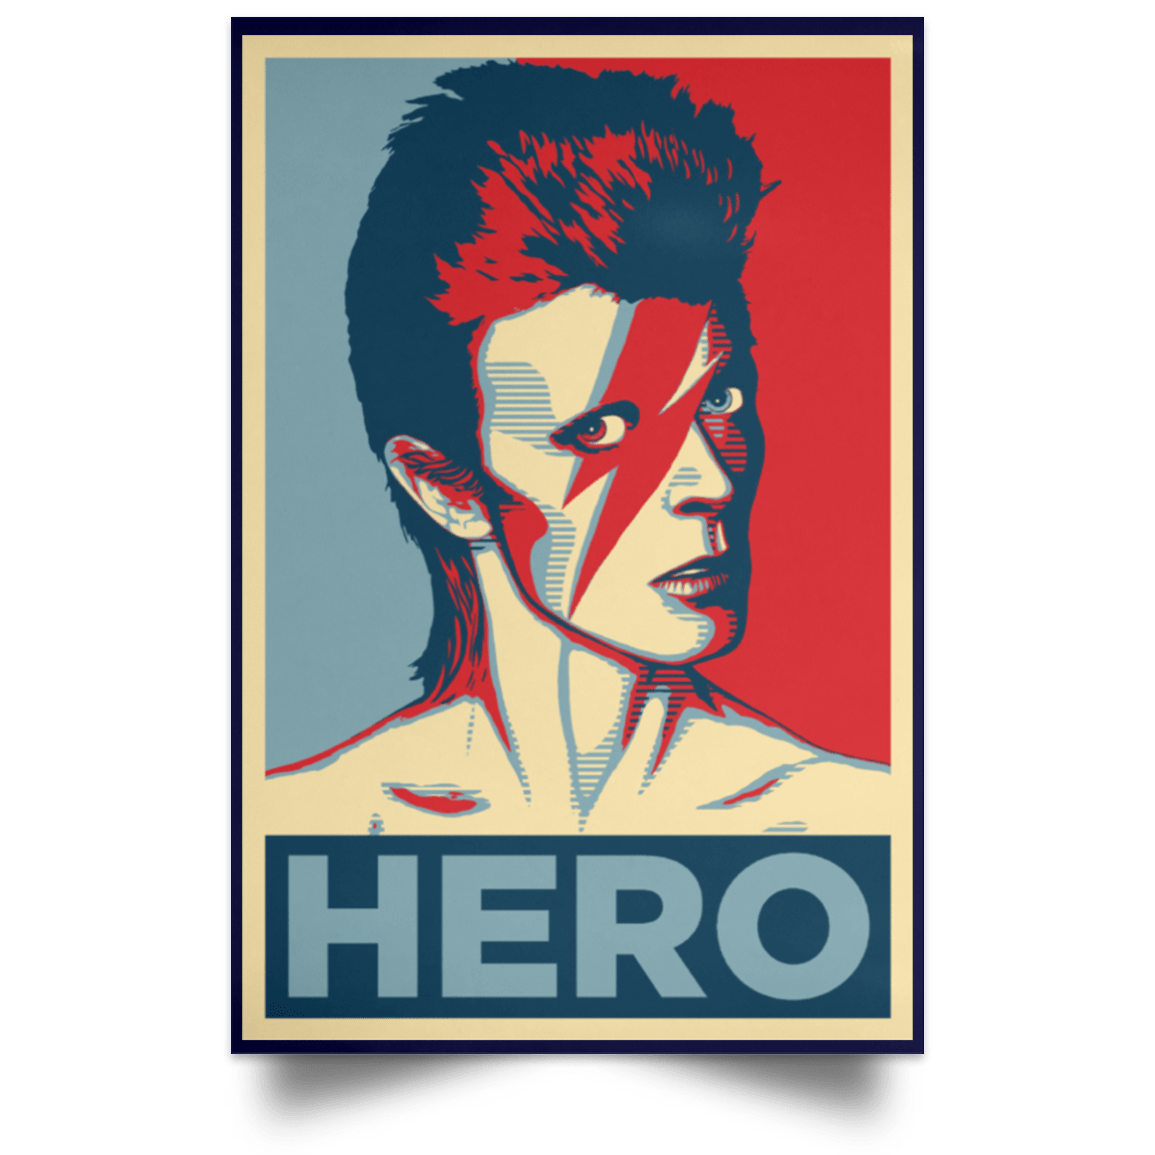 Obey the HERO Portrait Poster